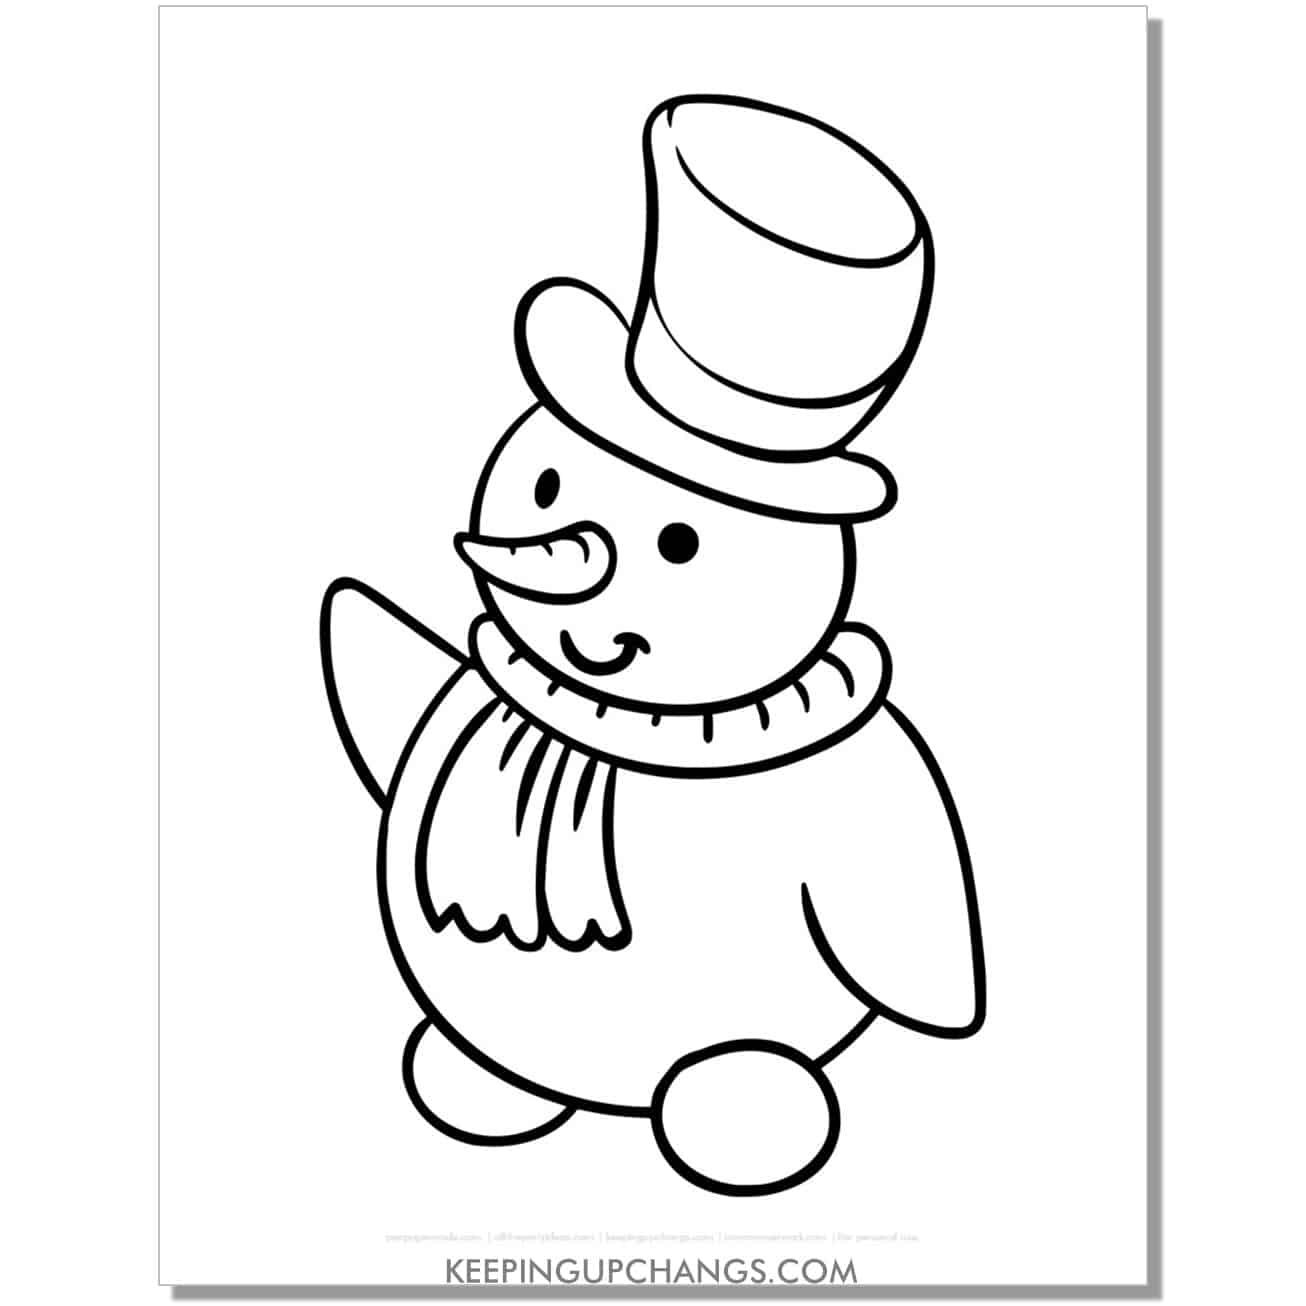 free snowman with arms, top hat coloring page.